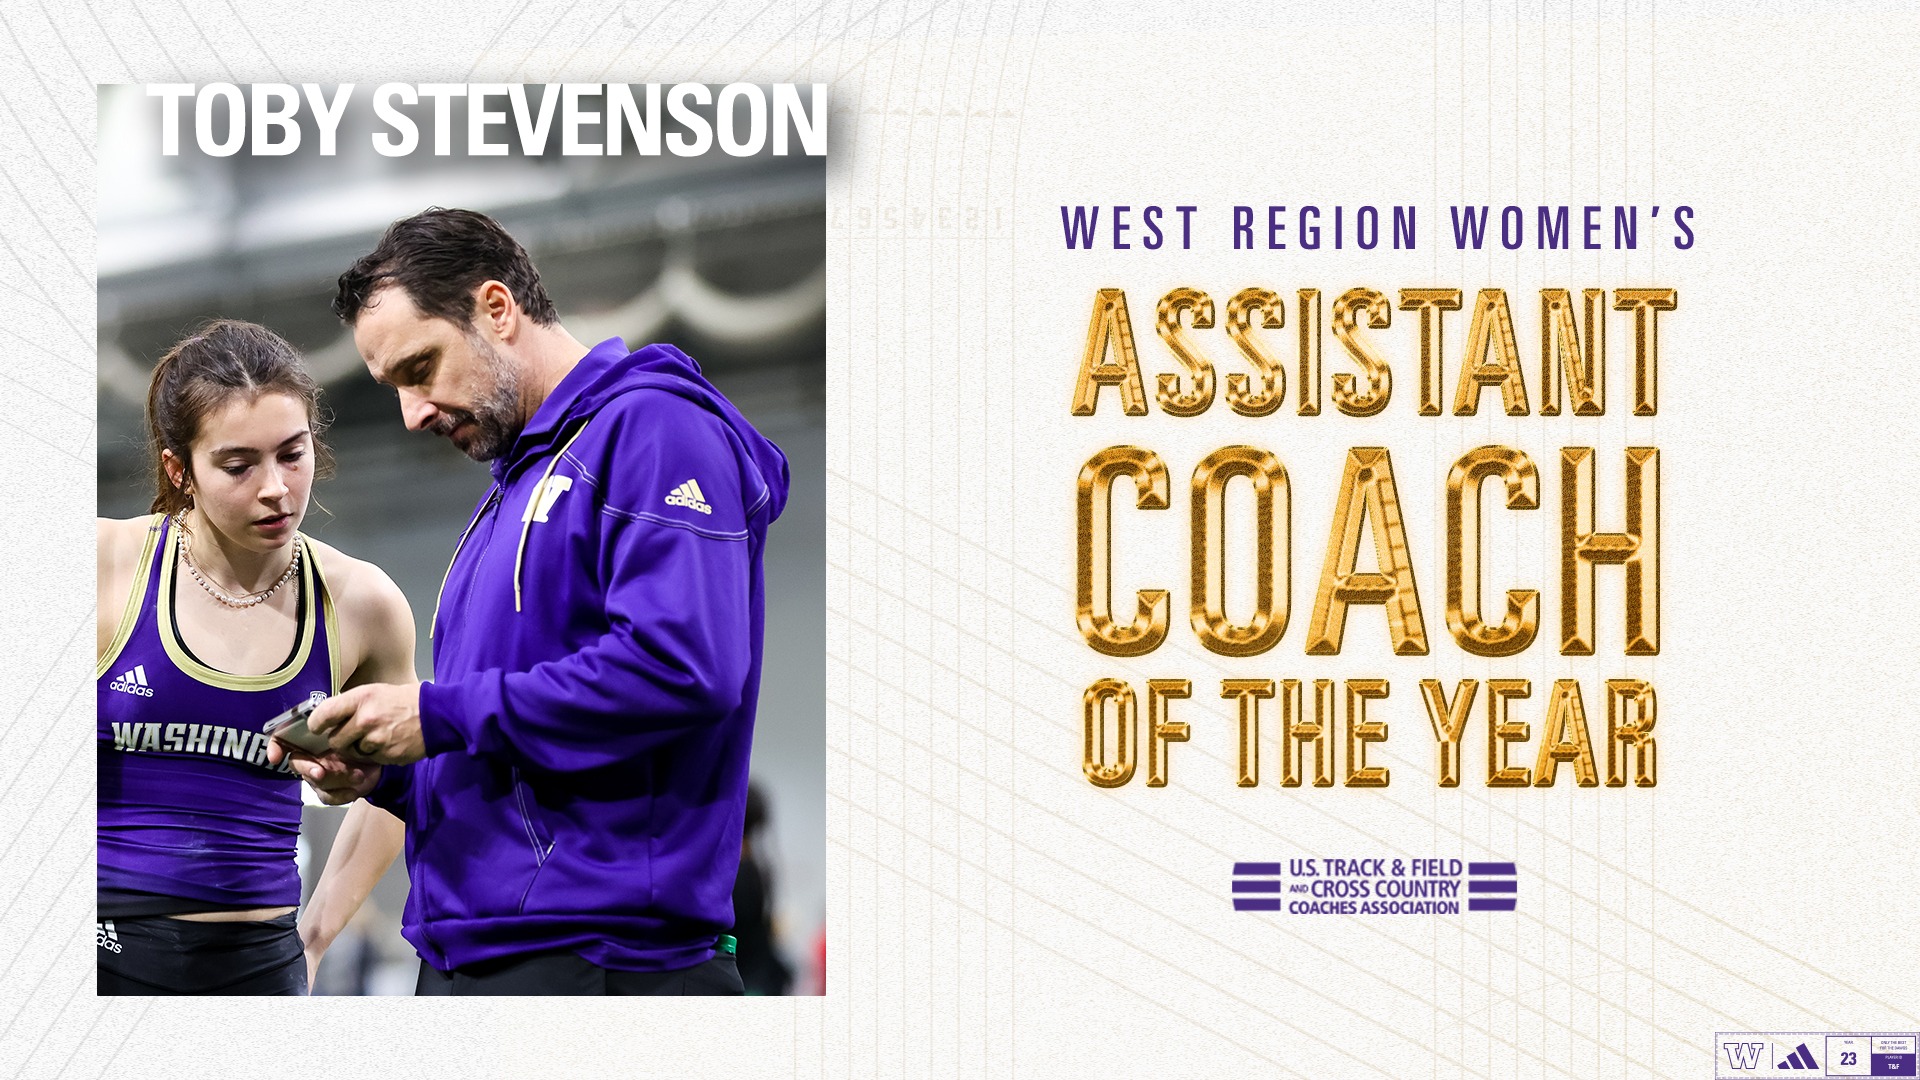 stevenson assistant coach of the year